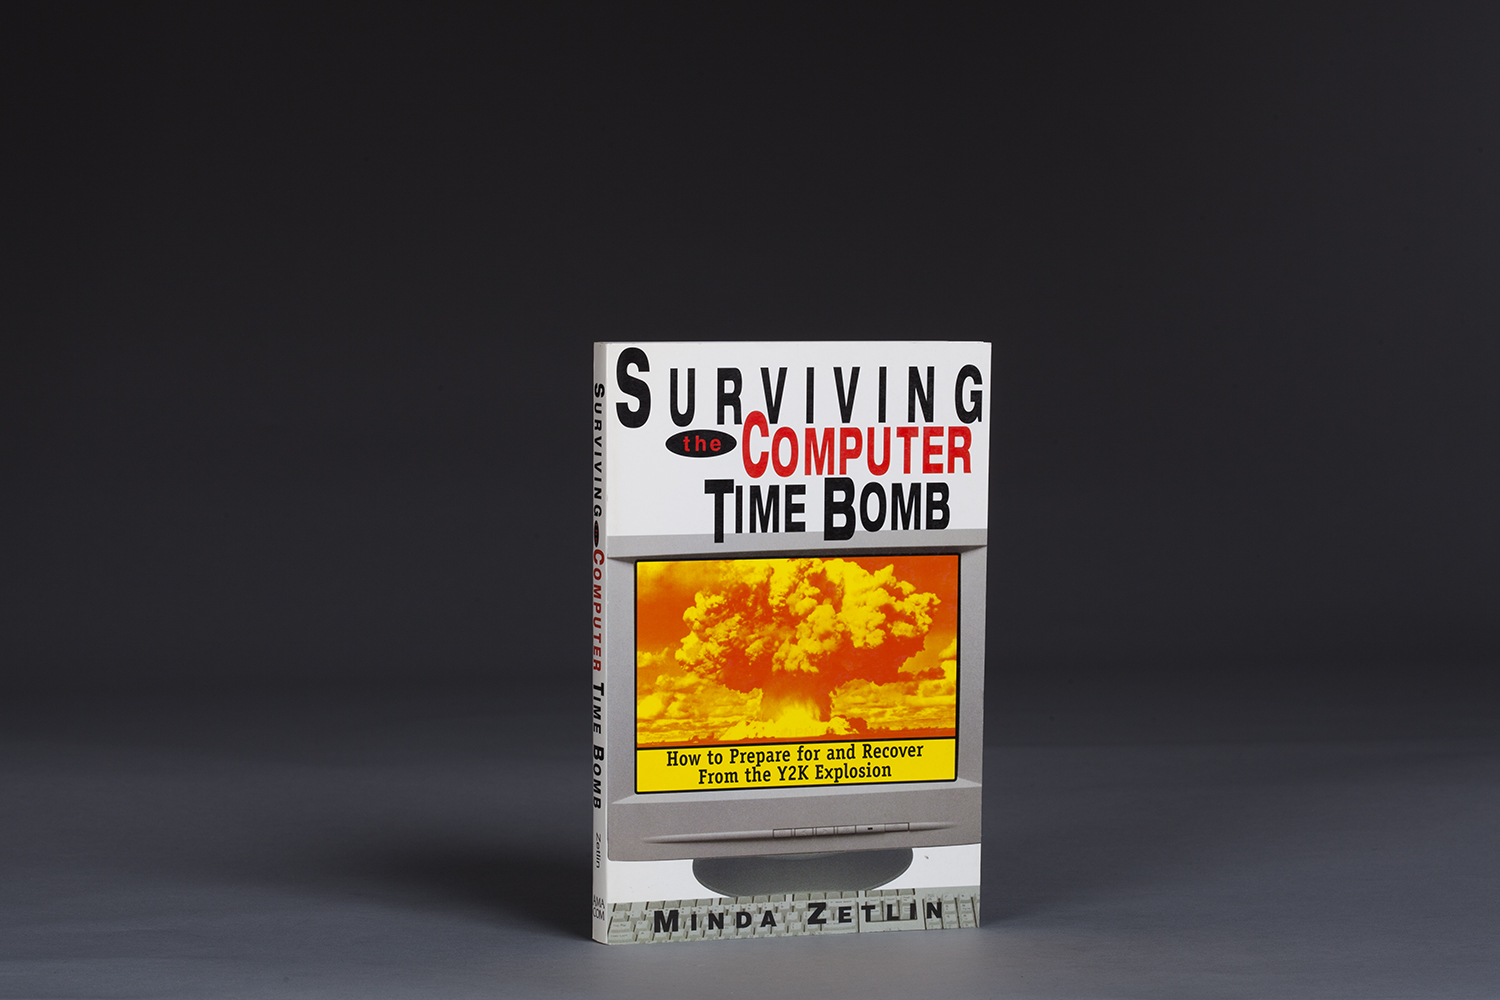 Surviving the Computer Time Bomb - 0347 Cover.jpg